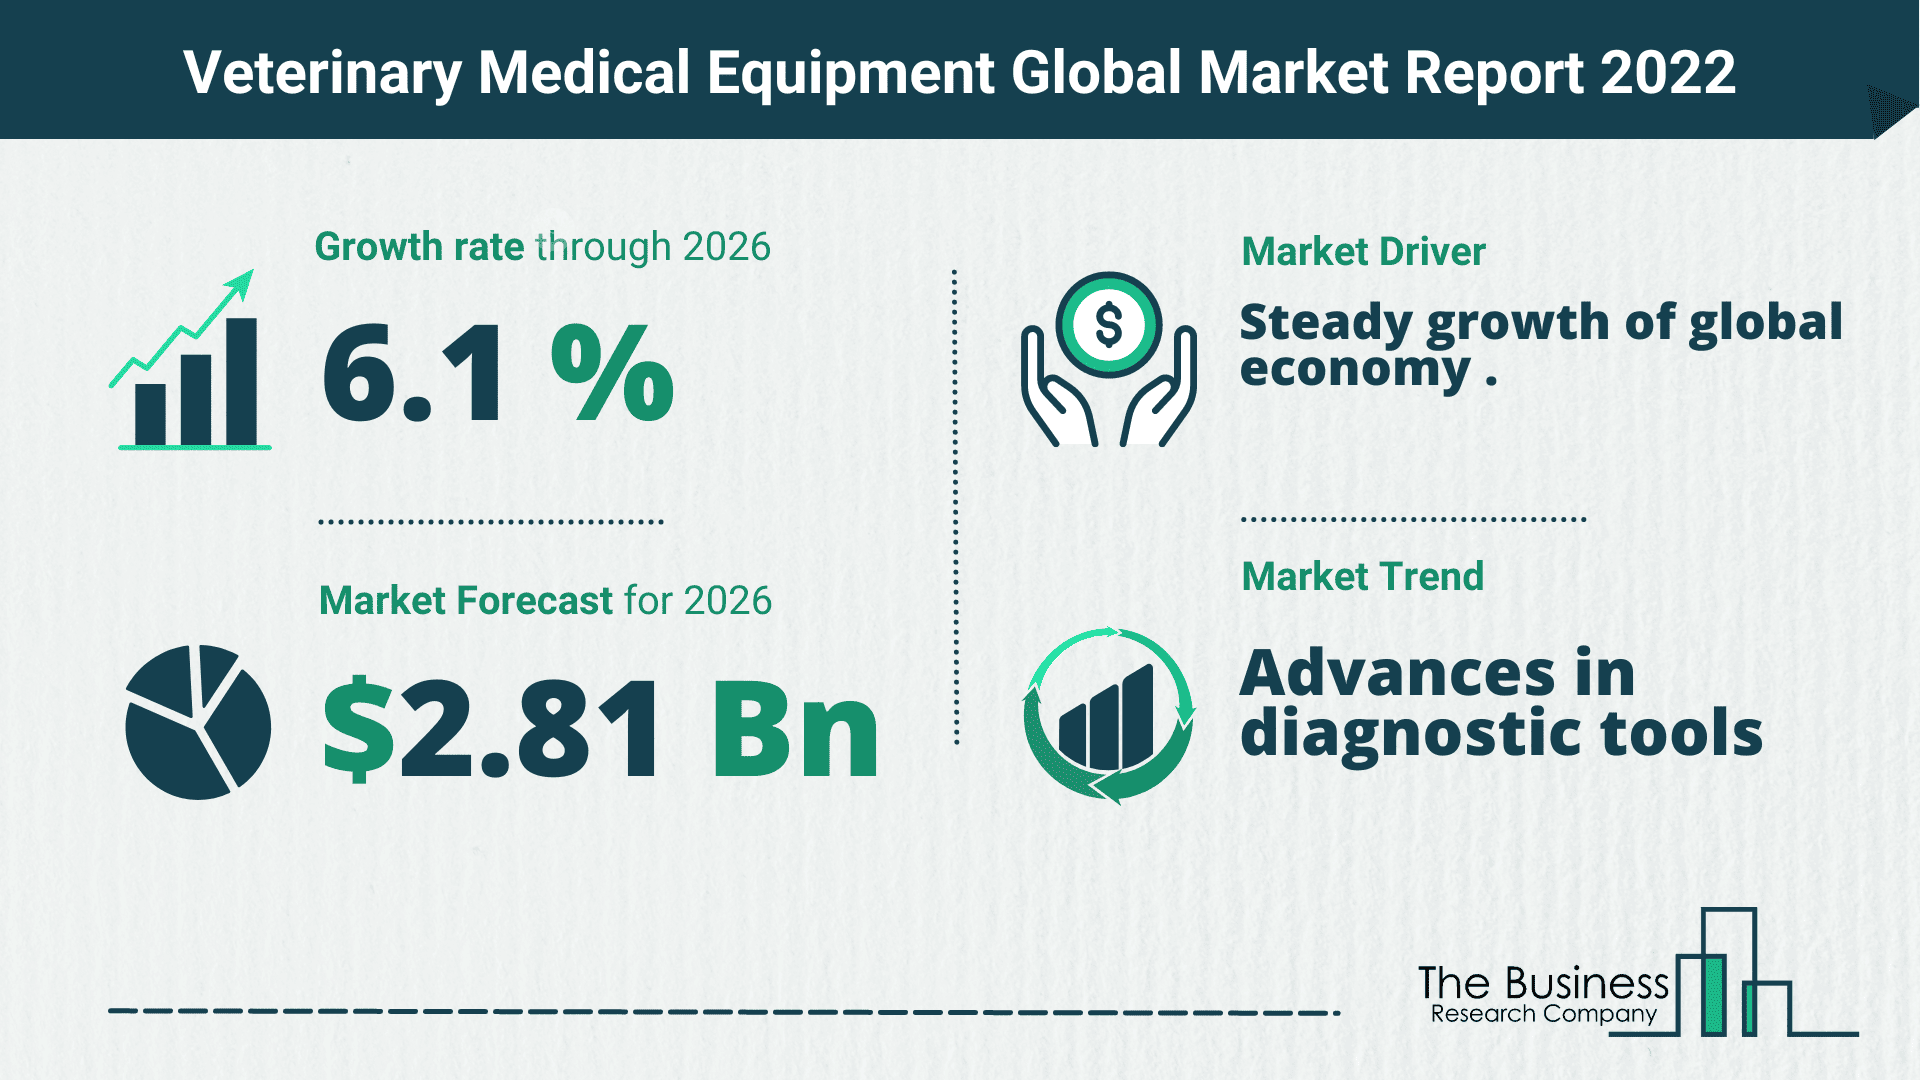 How Will The Veterinary Medical Equipment Market Grow In 2022?